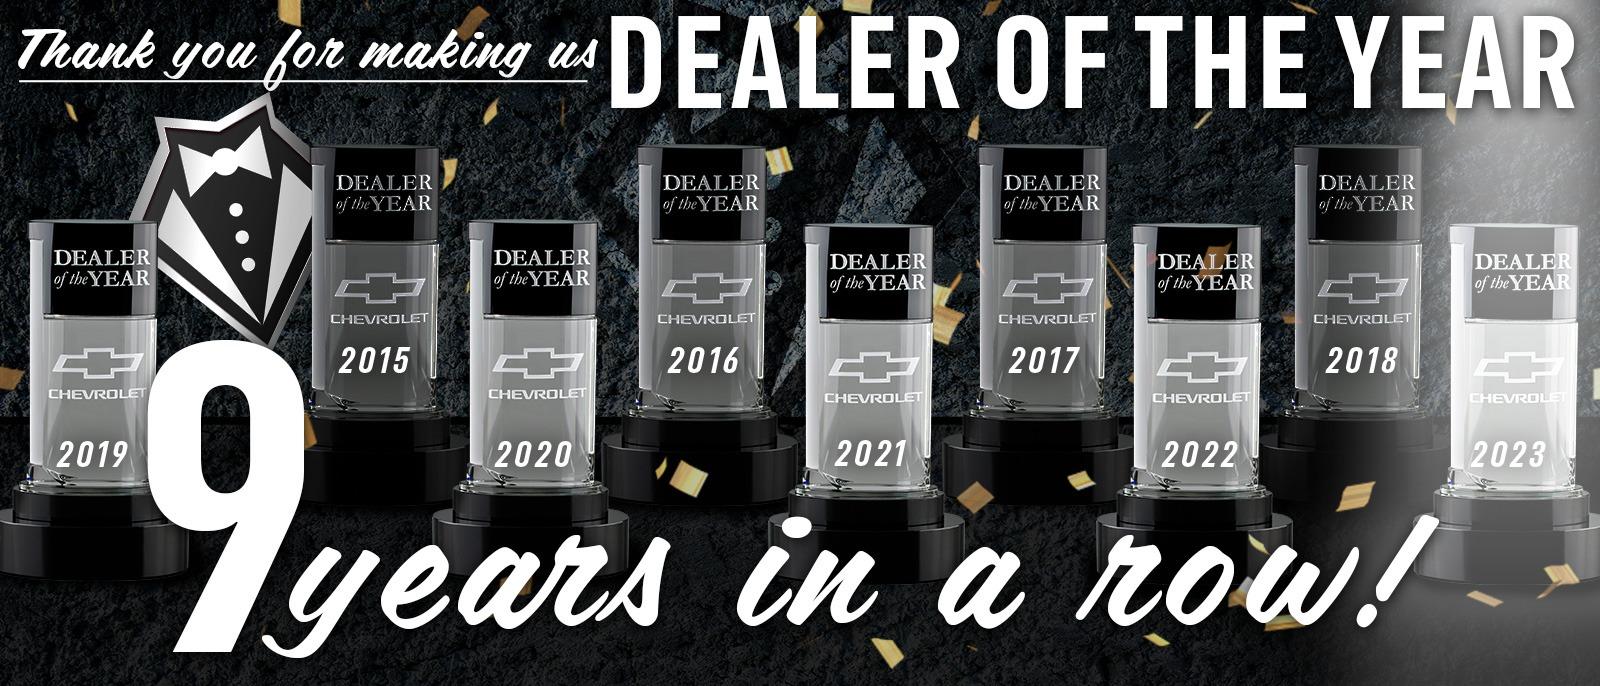 Dealer of the Year 9 Years Running!